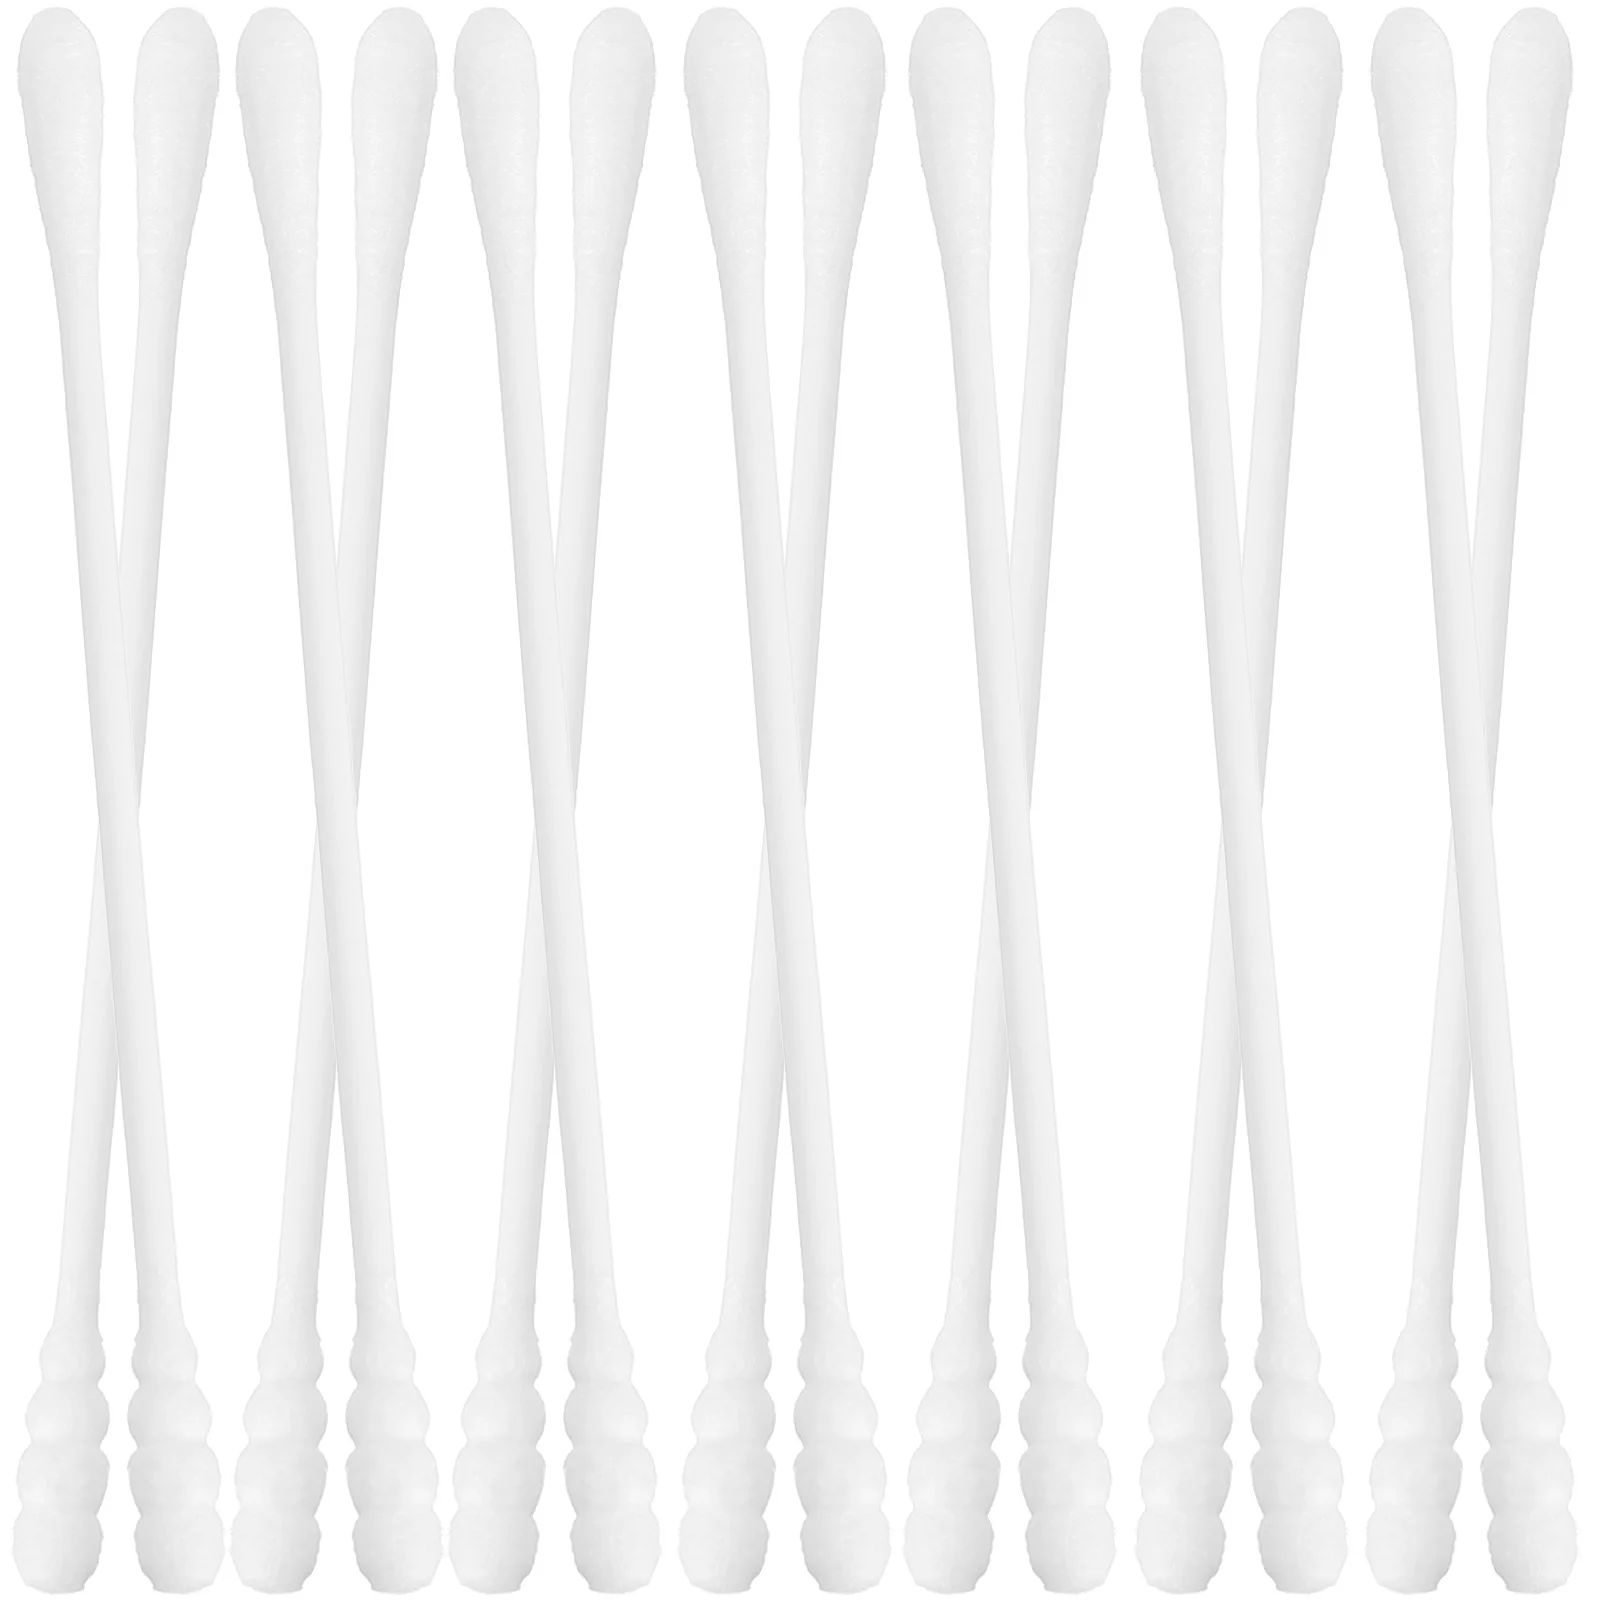 

Baby Cotton Swab Mouth Tongue Cleaner Buds Swabs With Different Heads Makeup Cleaning Tools